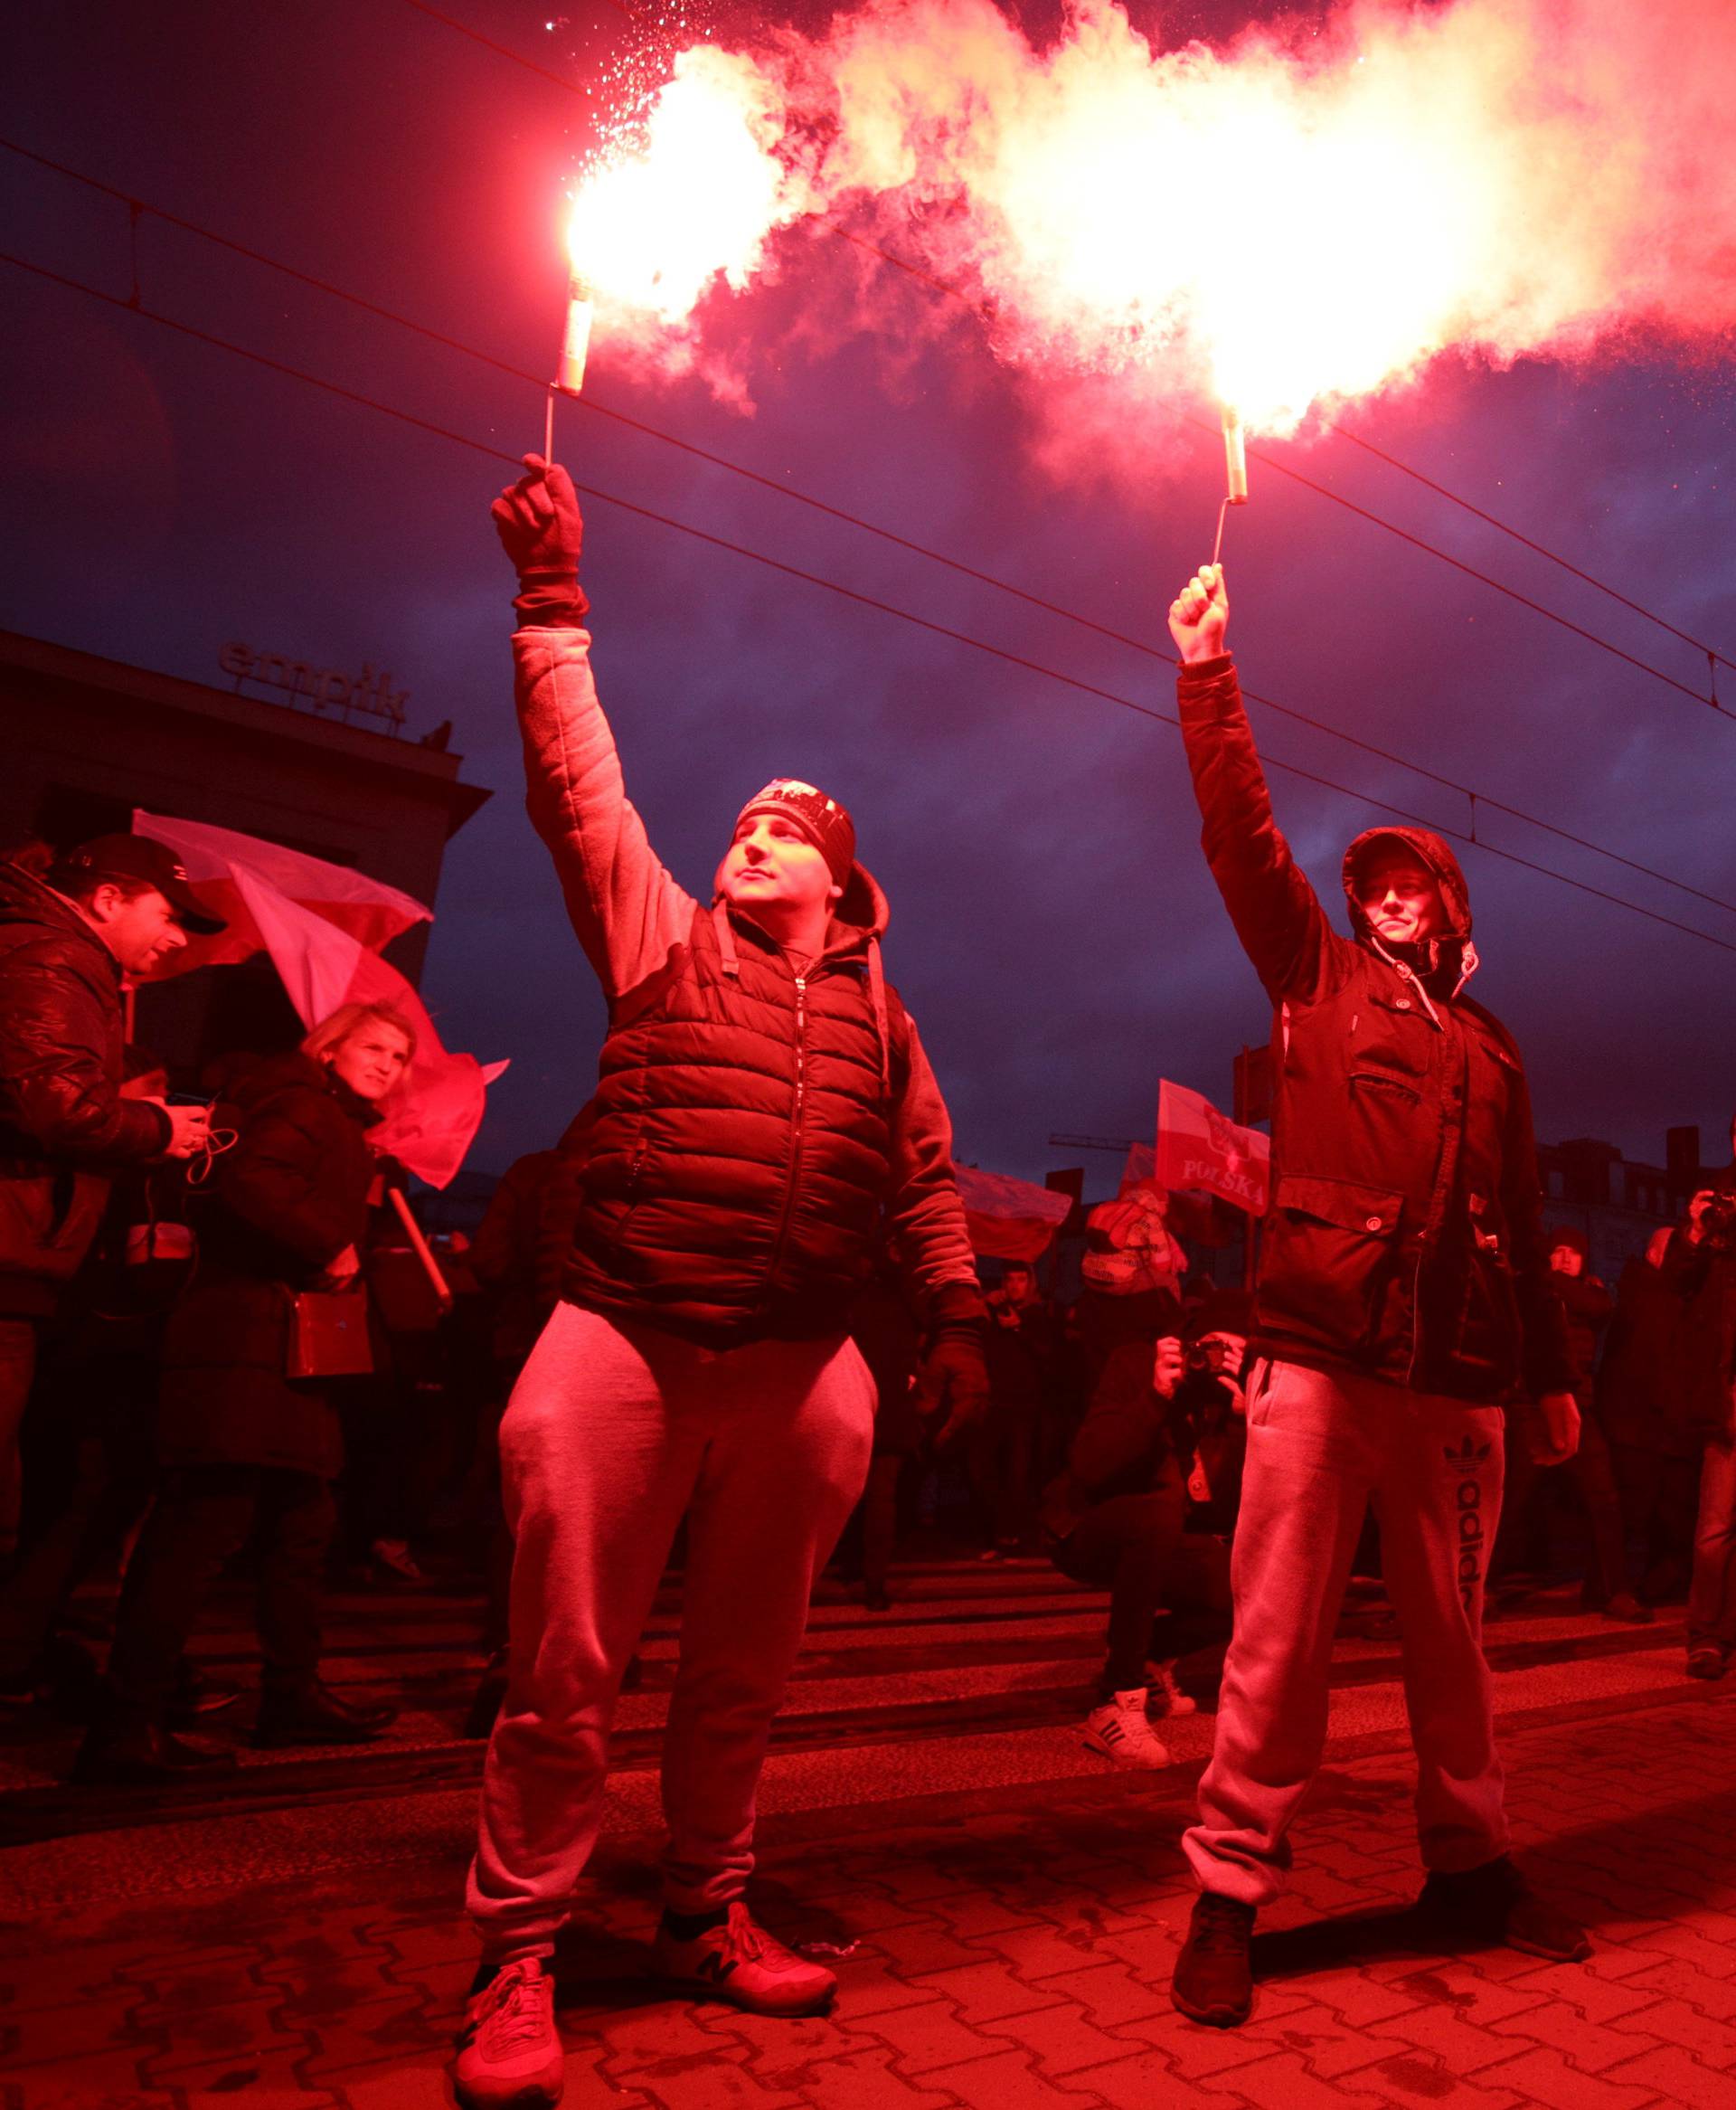 Protesters light flares and carry Polish flags during a rally, organised by far-right, nationalist groups, to mark 99th anniversary of Polish independence in Warsaw